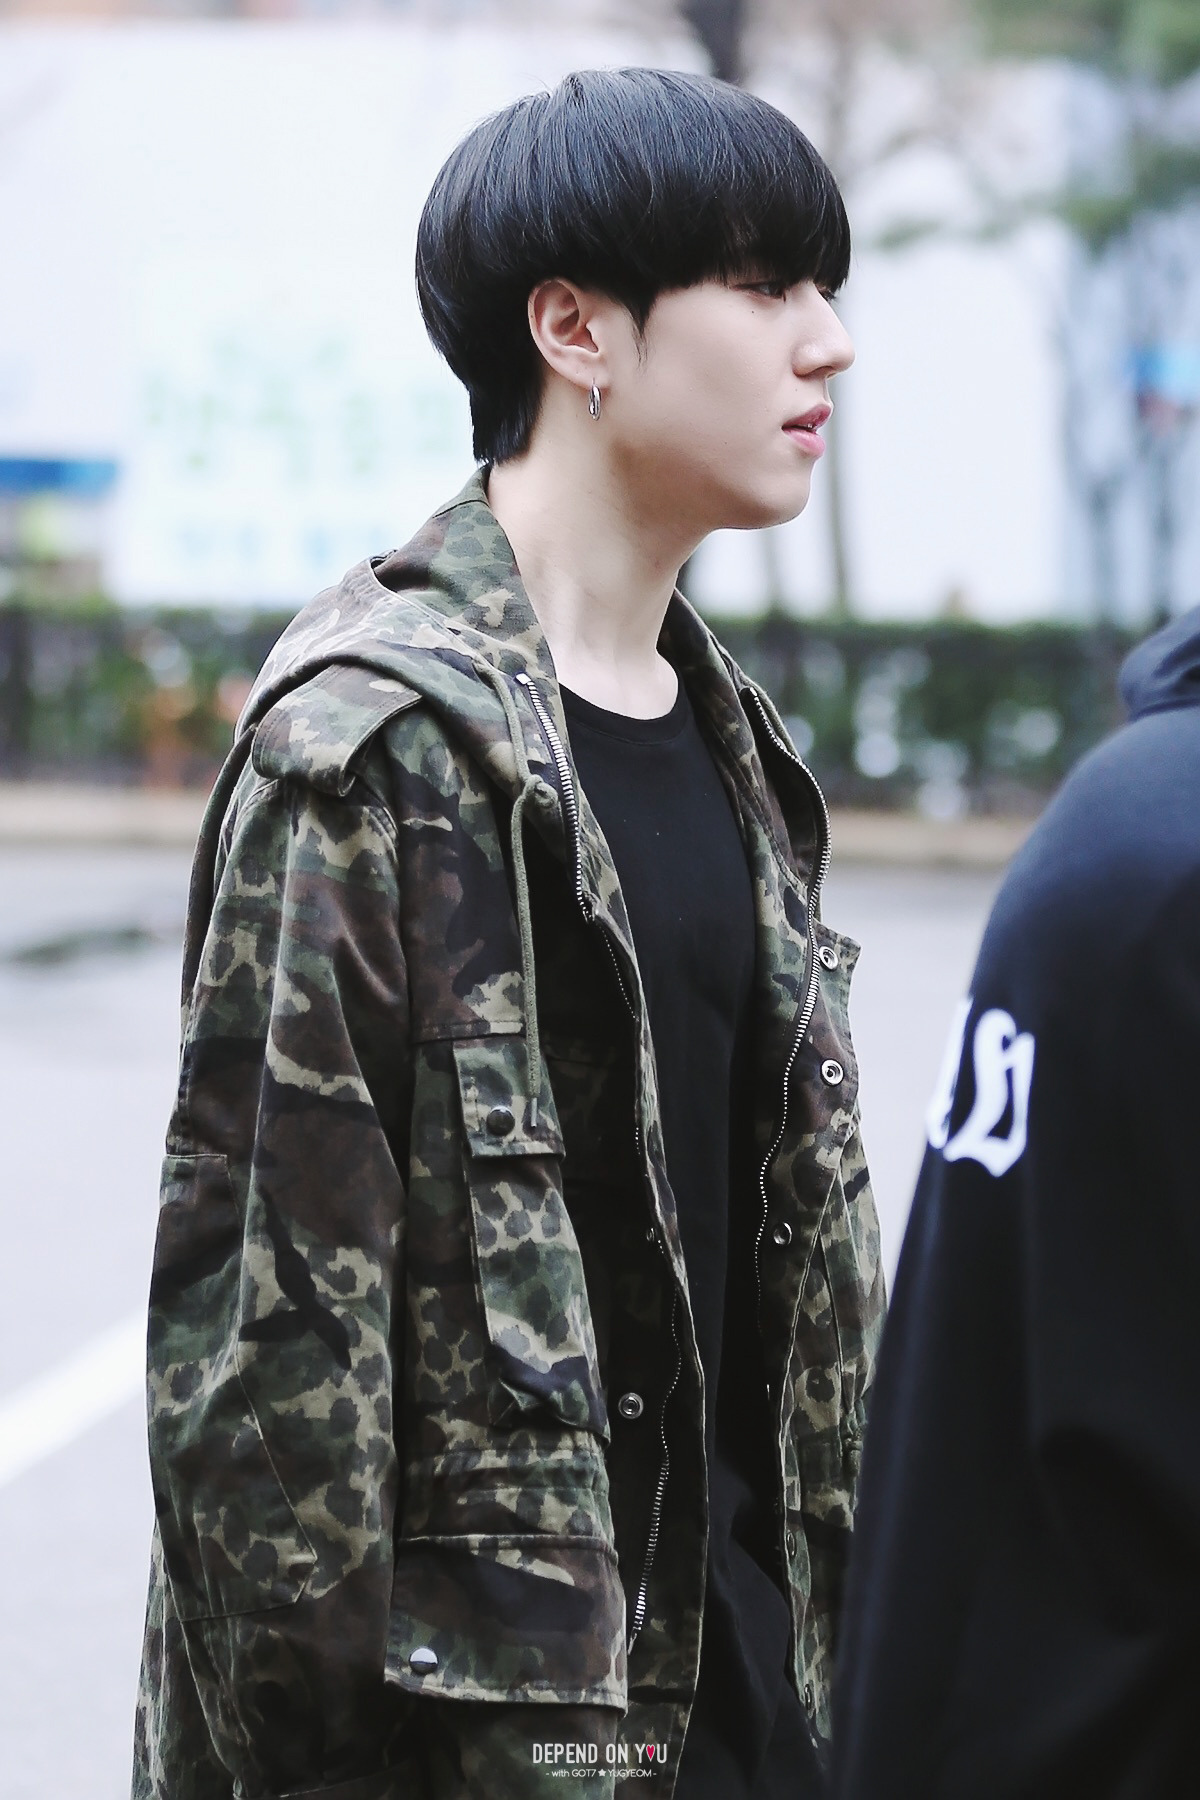 FY! Yugyeom : Depend On You | do not edit